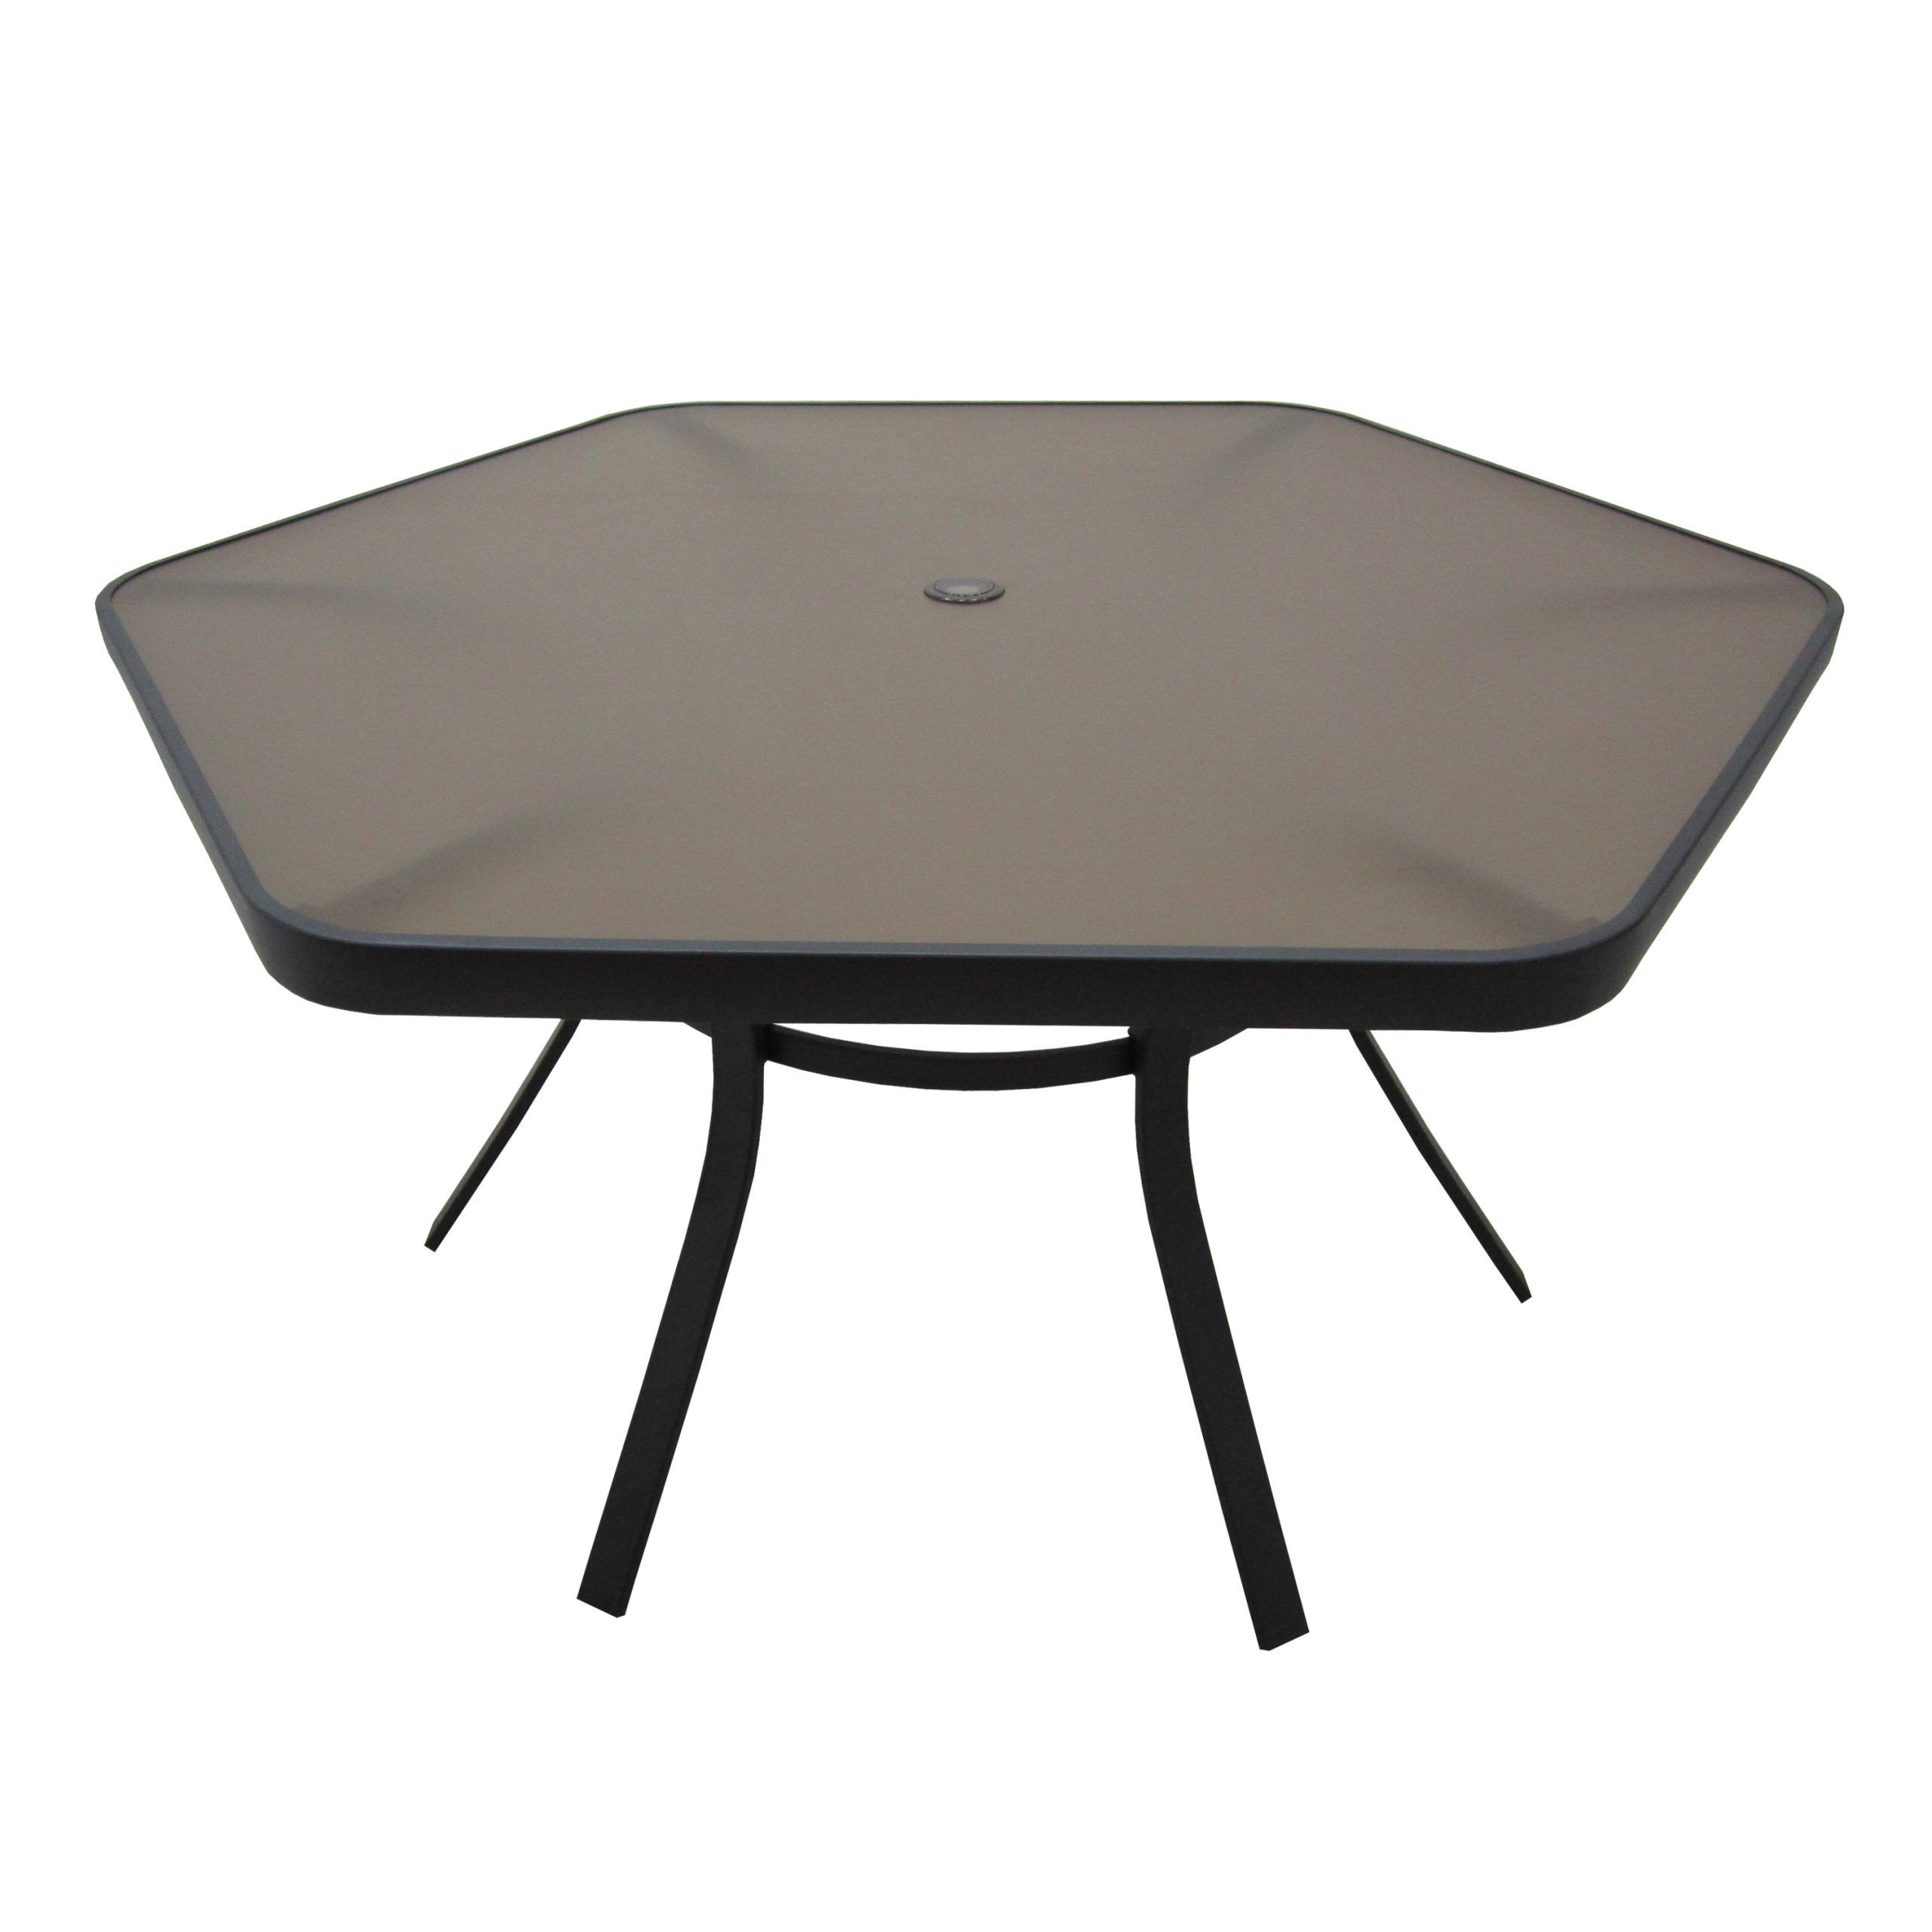 Octagon Glass Top Outdoor Tables For Trendy Garden Treasures Hayden Island Hexagon Outdoor Dining Table 56 In W X 50 In  L Umbrella Hole At Lowes (View 4 of 15)